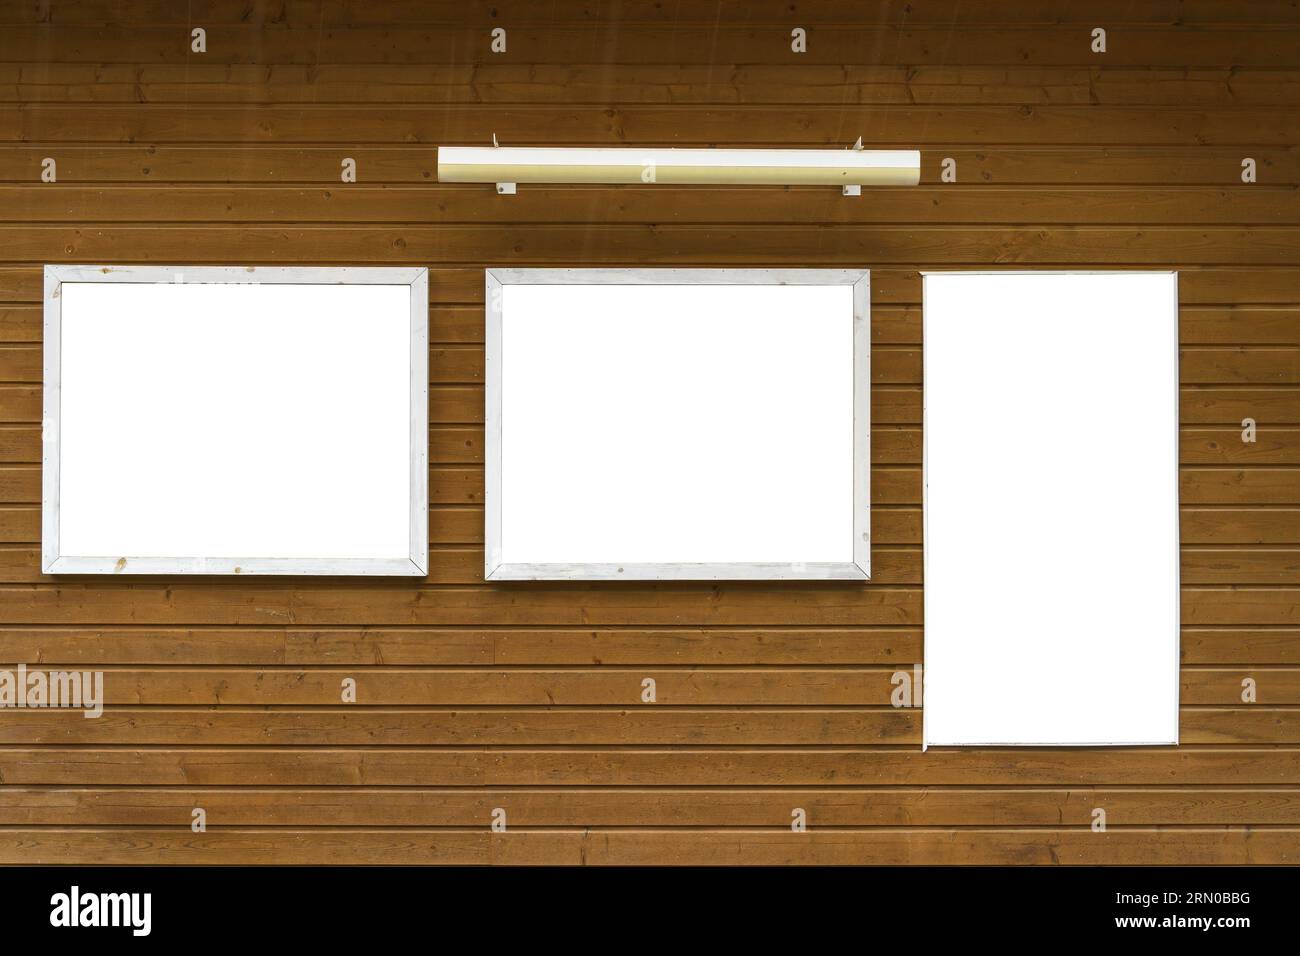 Three empty white bulletin boards on a wooden wall. Stock Photo